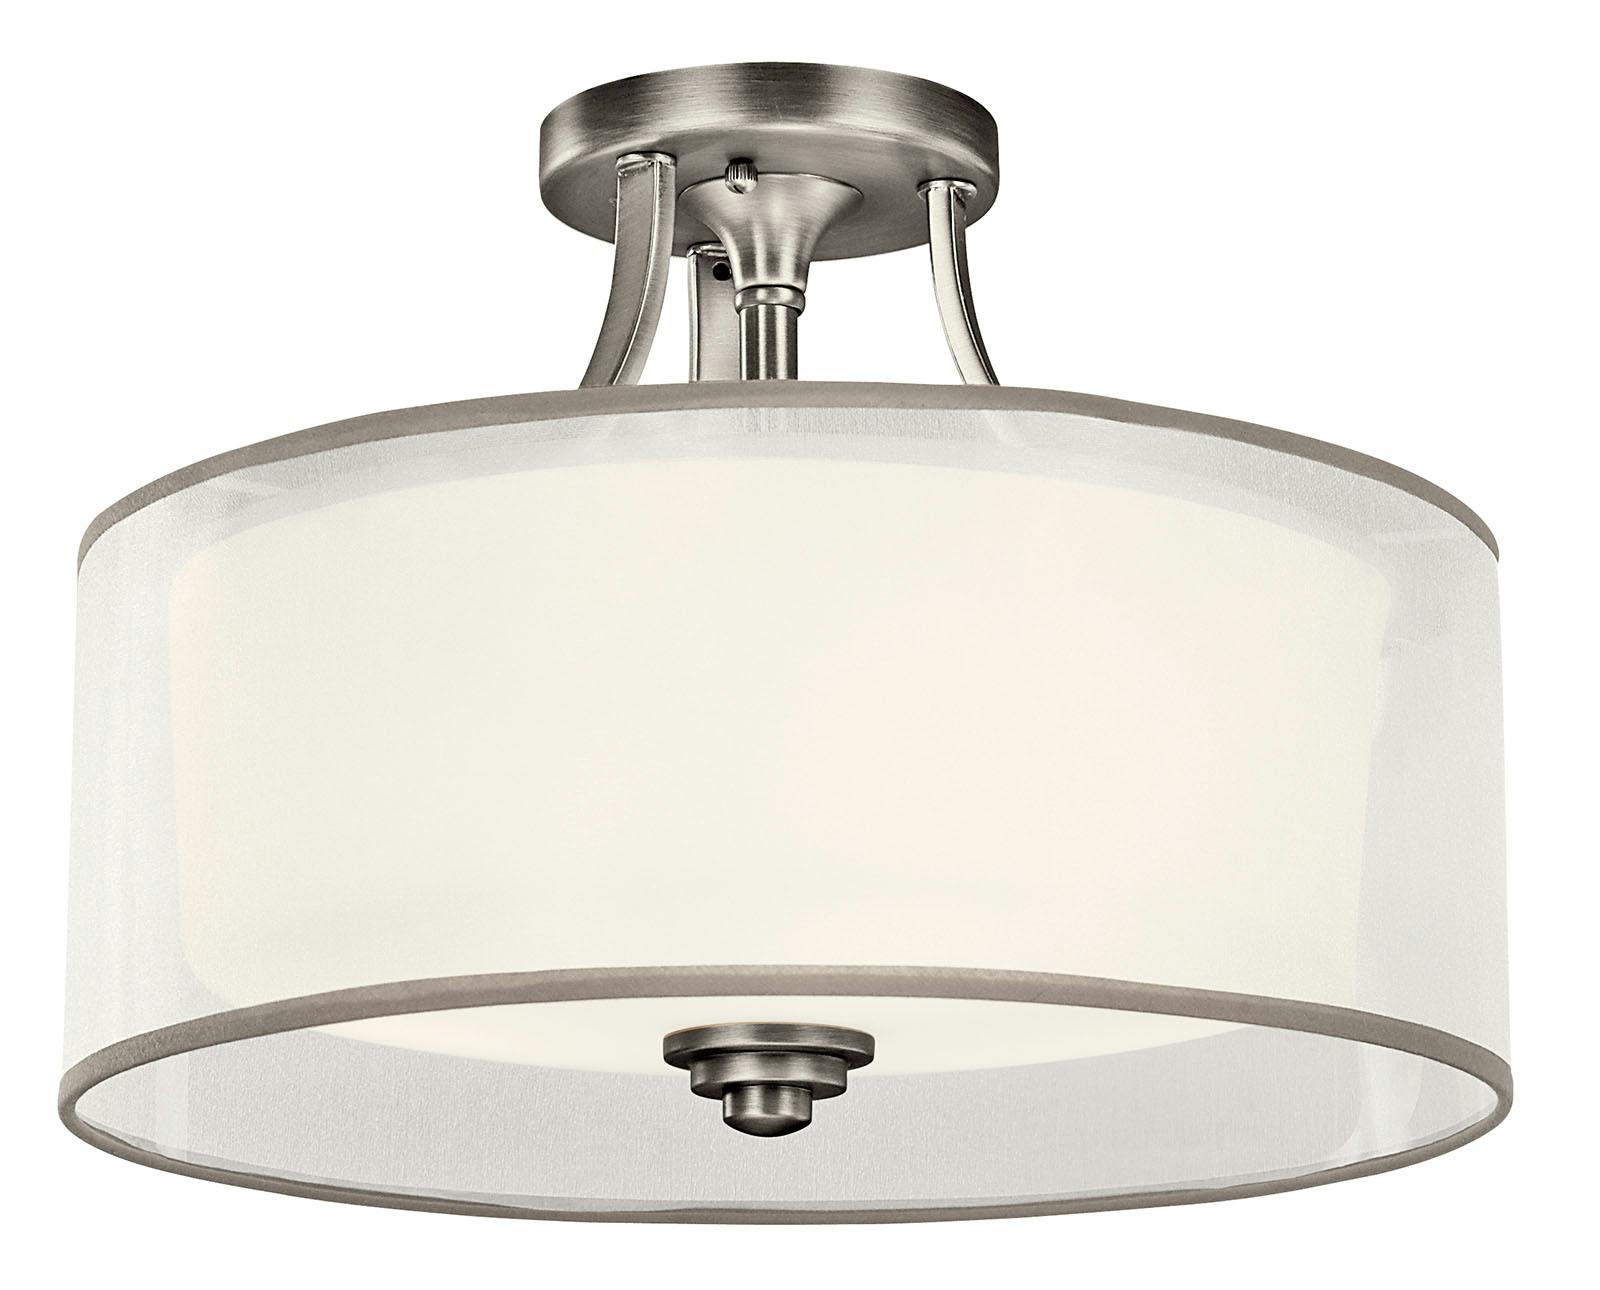 Lacey 15" 3 Light Semi Flush in Pewter on a white background